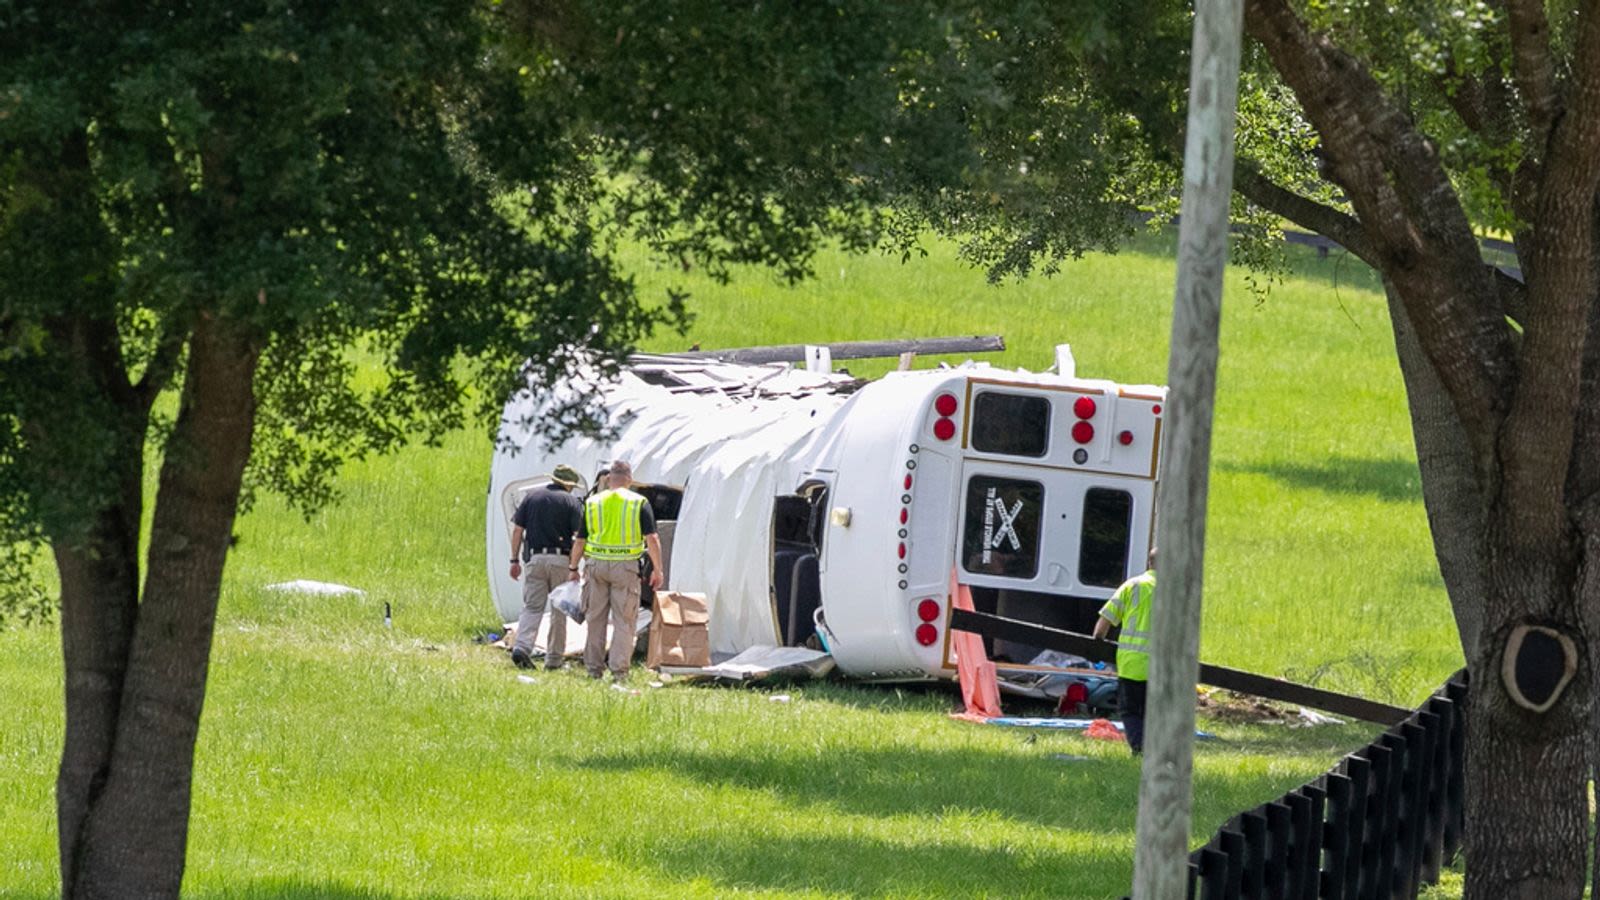 8 Mexican farmworkers killed in Florida bus crash